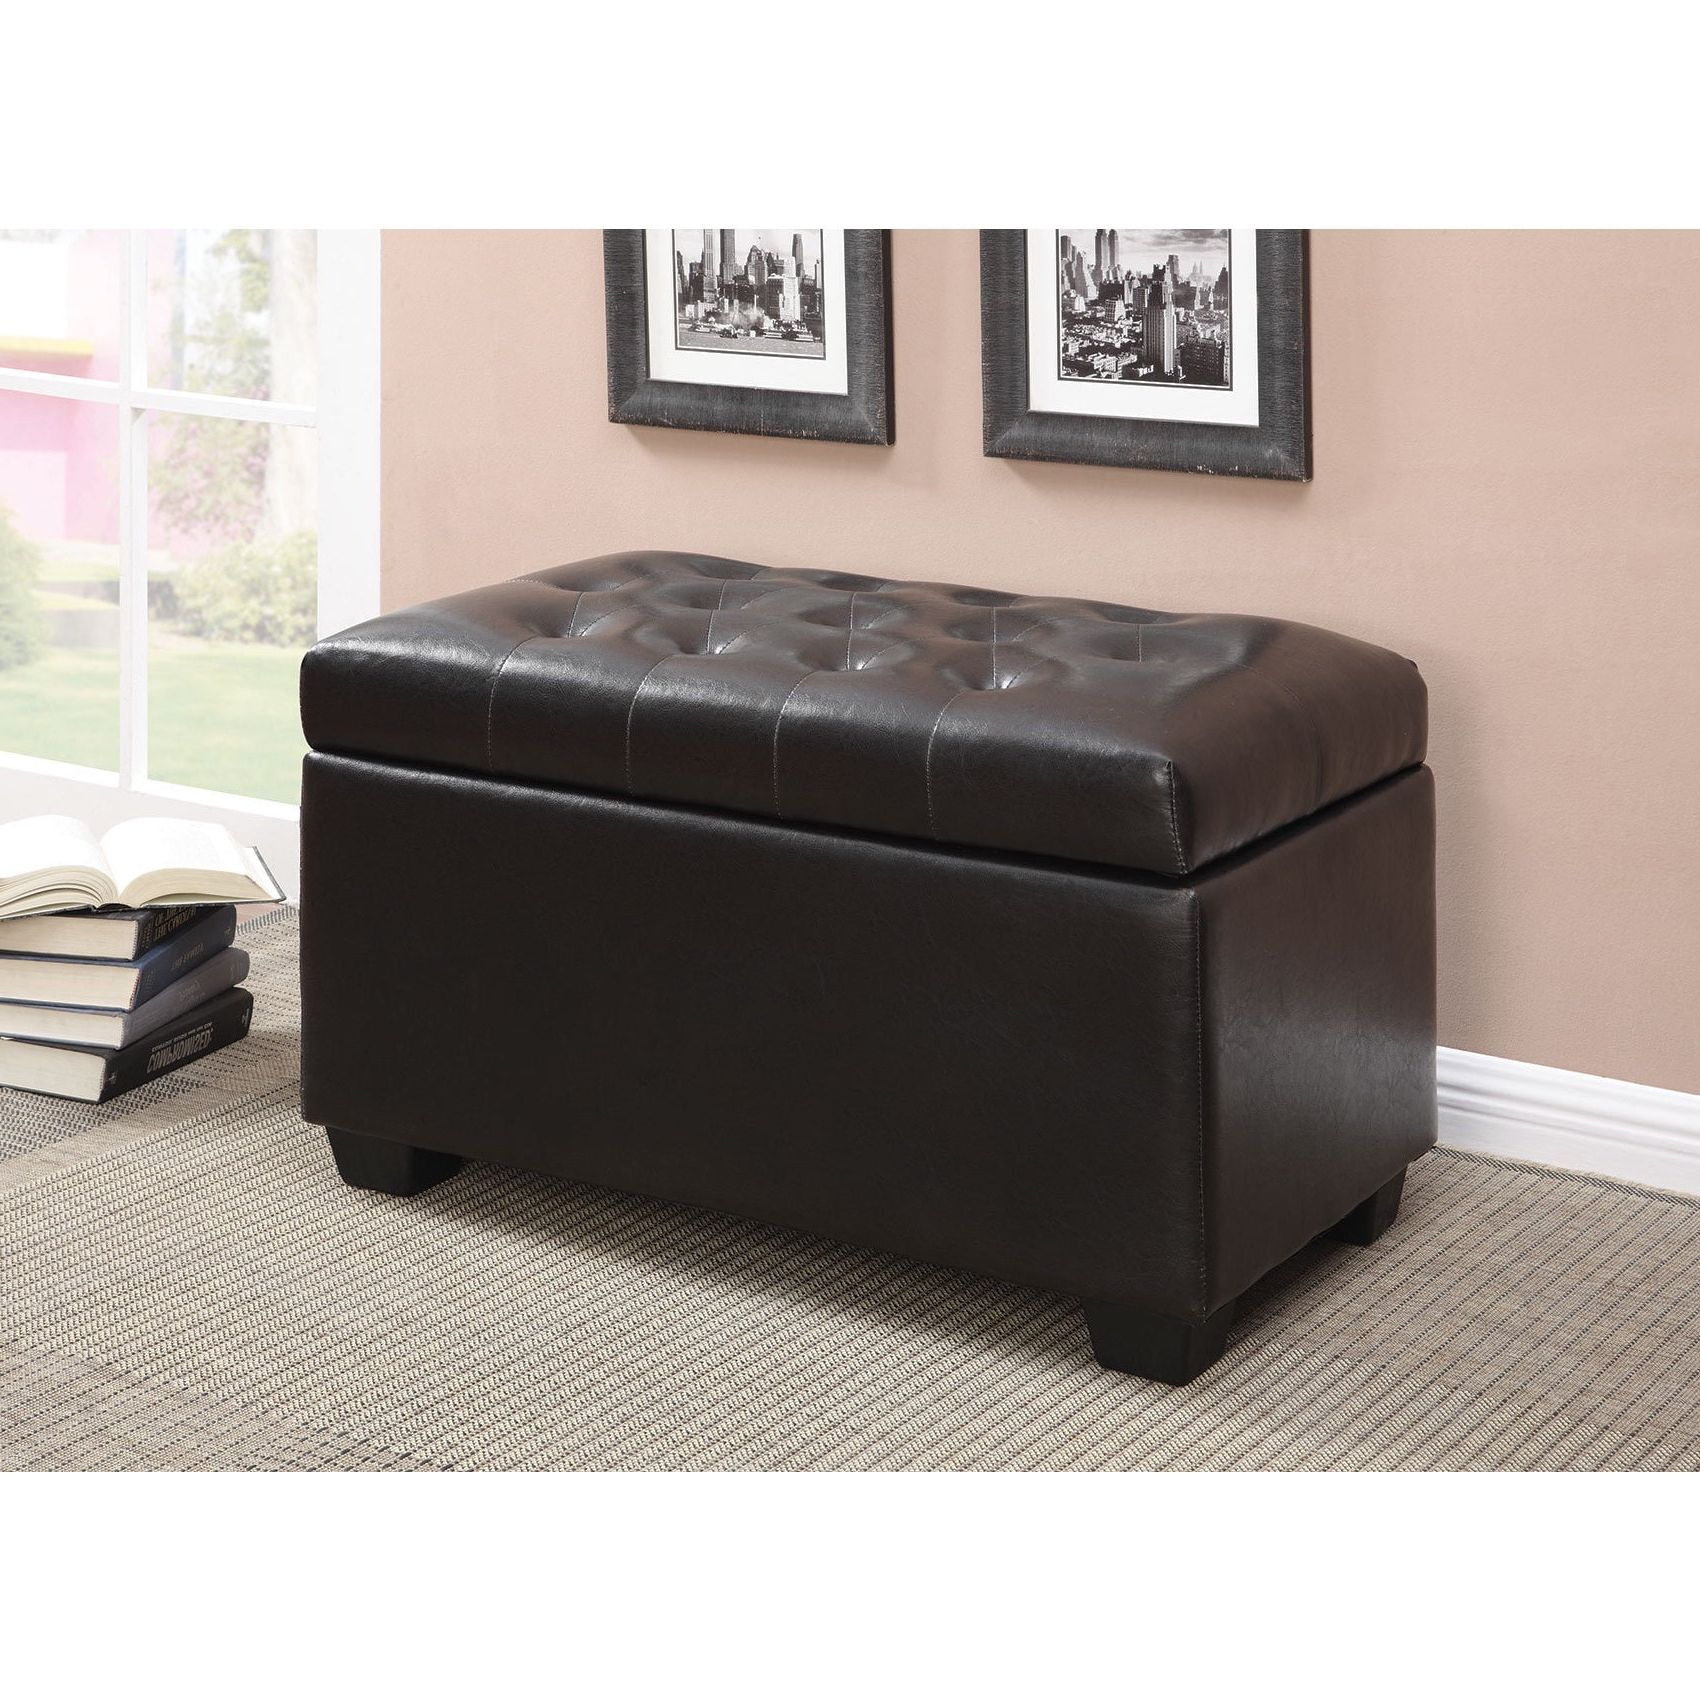 2017 Brown And Gray Button Tufted Ottomans Intended For Coaster Company Dark Brown Button Tufted Storage Ottoman Black 36" X  (View 5 of 10)